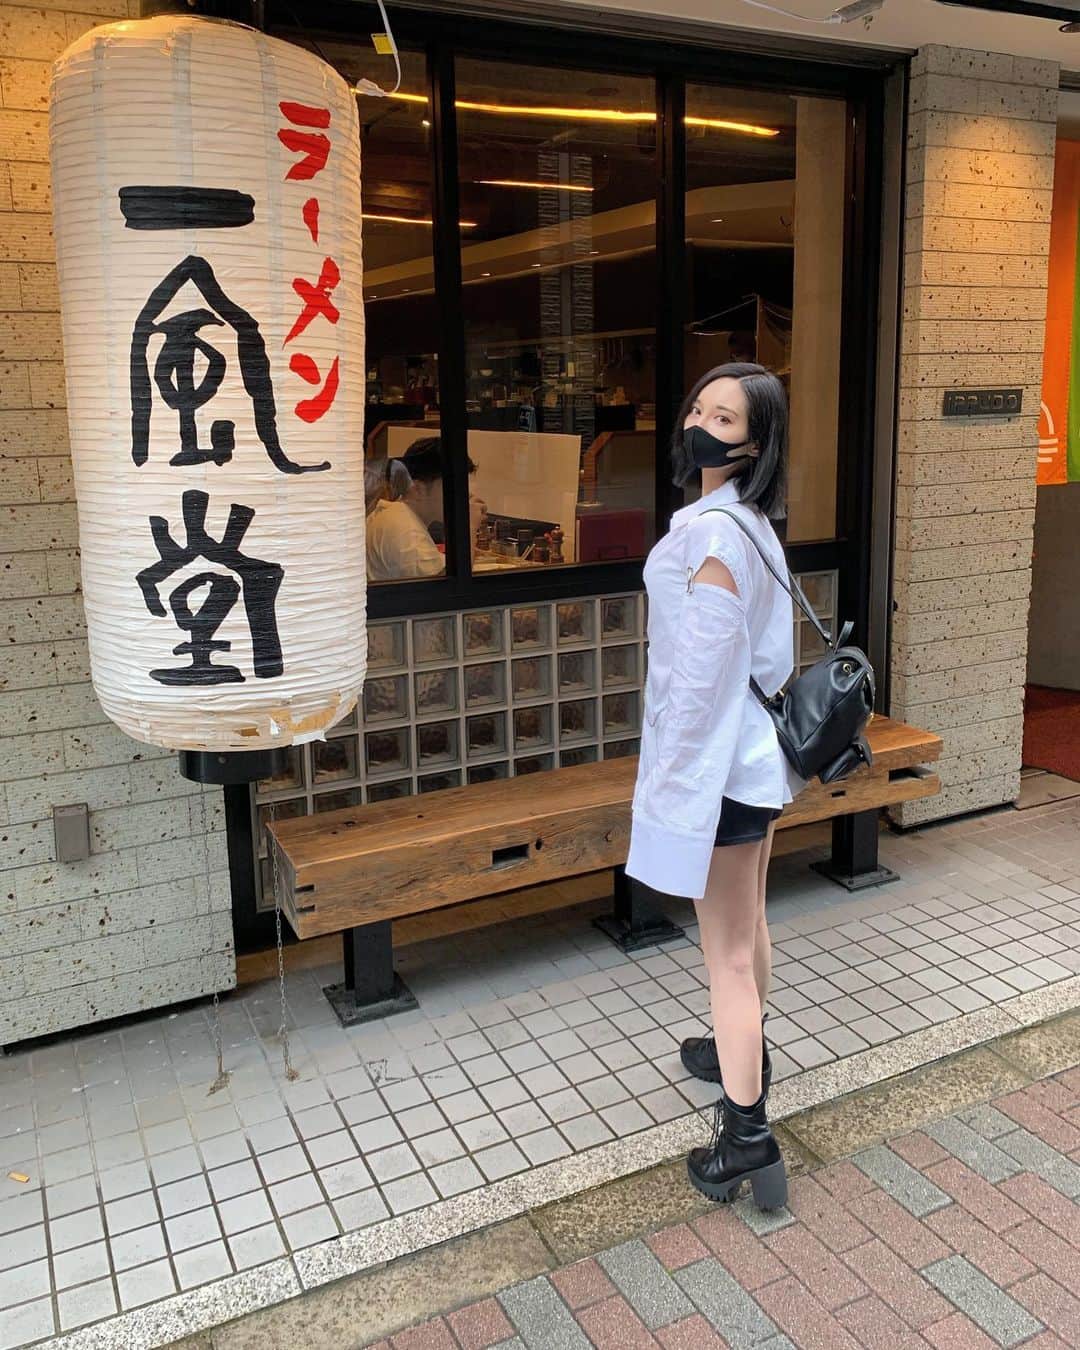 Rabiのインスタグラム：「I haven’t gone out to eat since the whole quarantine situation started. Lot of restaurants are reopening lately so the first thing I had was #ramen🍜 ﻿❤️ ﻿ What food did/do you miss the most? ﻿🥺  ┈︎┈︎┈︎┈︎┈︎┈︎┈︎┈︎┈︎ #ippudo #ippudoramen﻿ #japaneseramen #japanesenoodles #tonkotsuramen #tokyoramen #ilovejapanesefood #tokyofoodies﻿ #ilovejapanesefood #japanesegirl #lifeintokyo﻿ #lifeinjapan #데일리 #일본 ﻿ #일본스냅﻿ #도쿄  #생활」